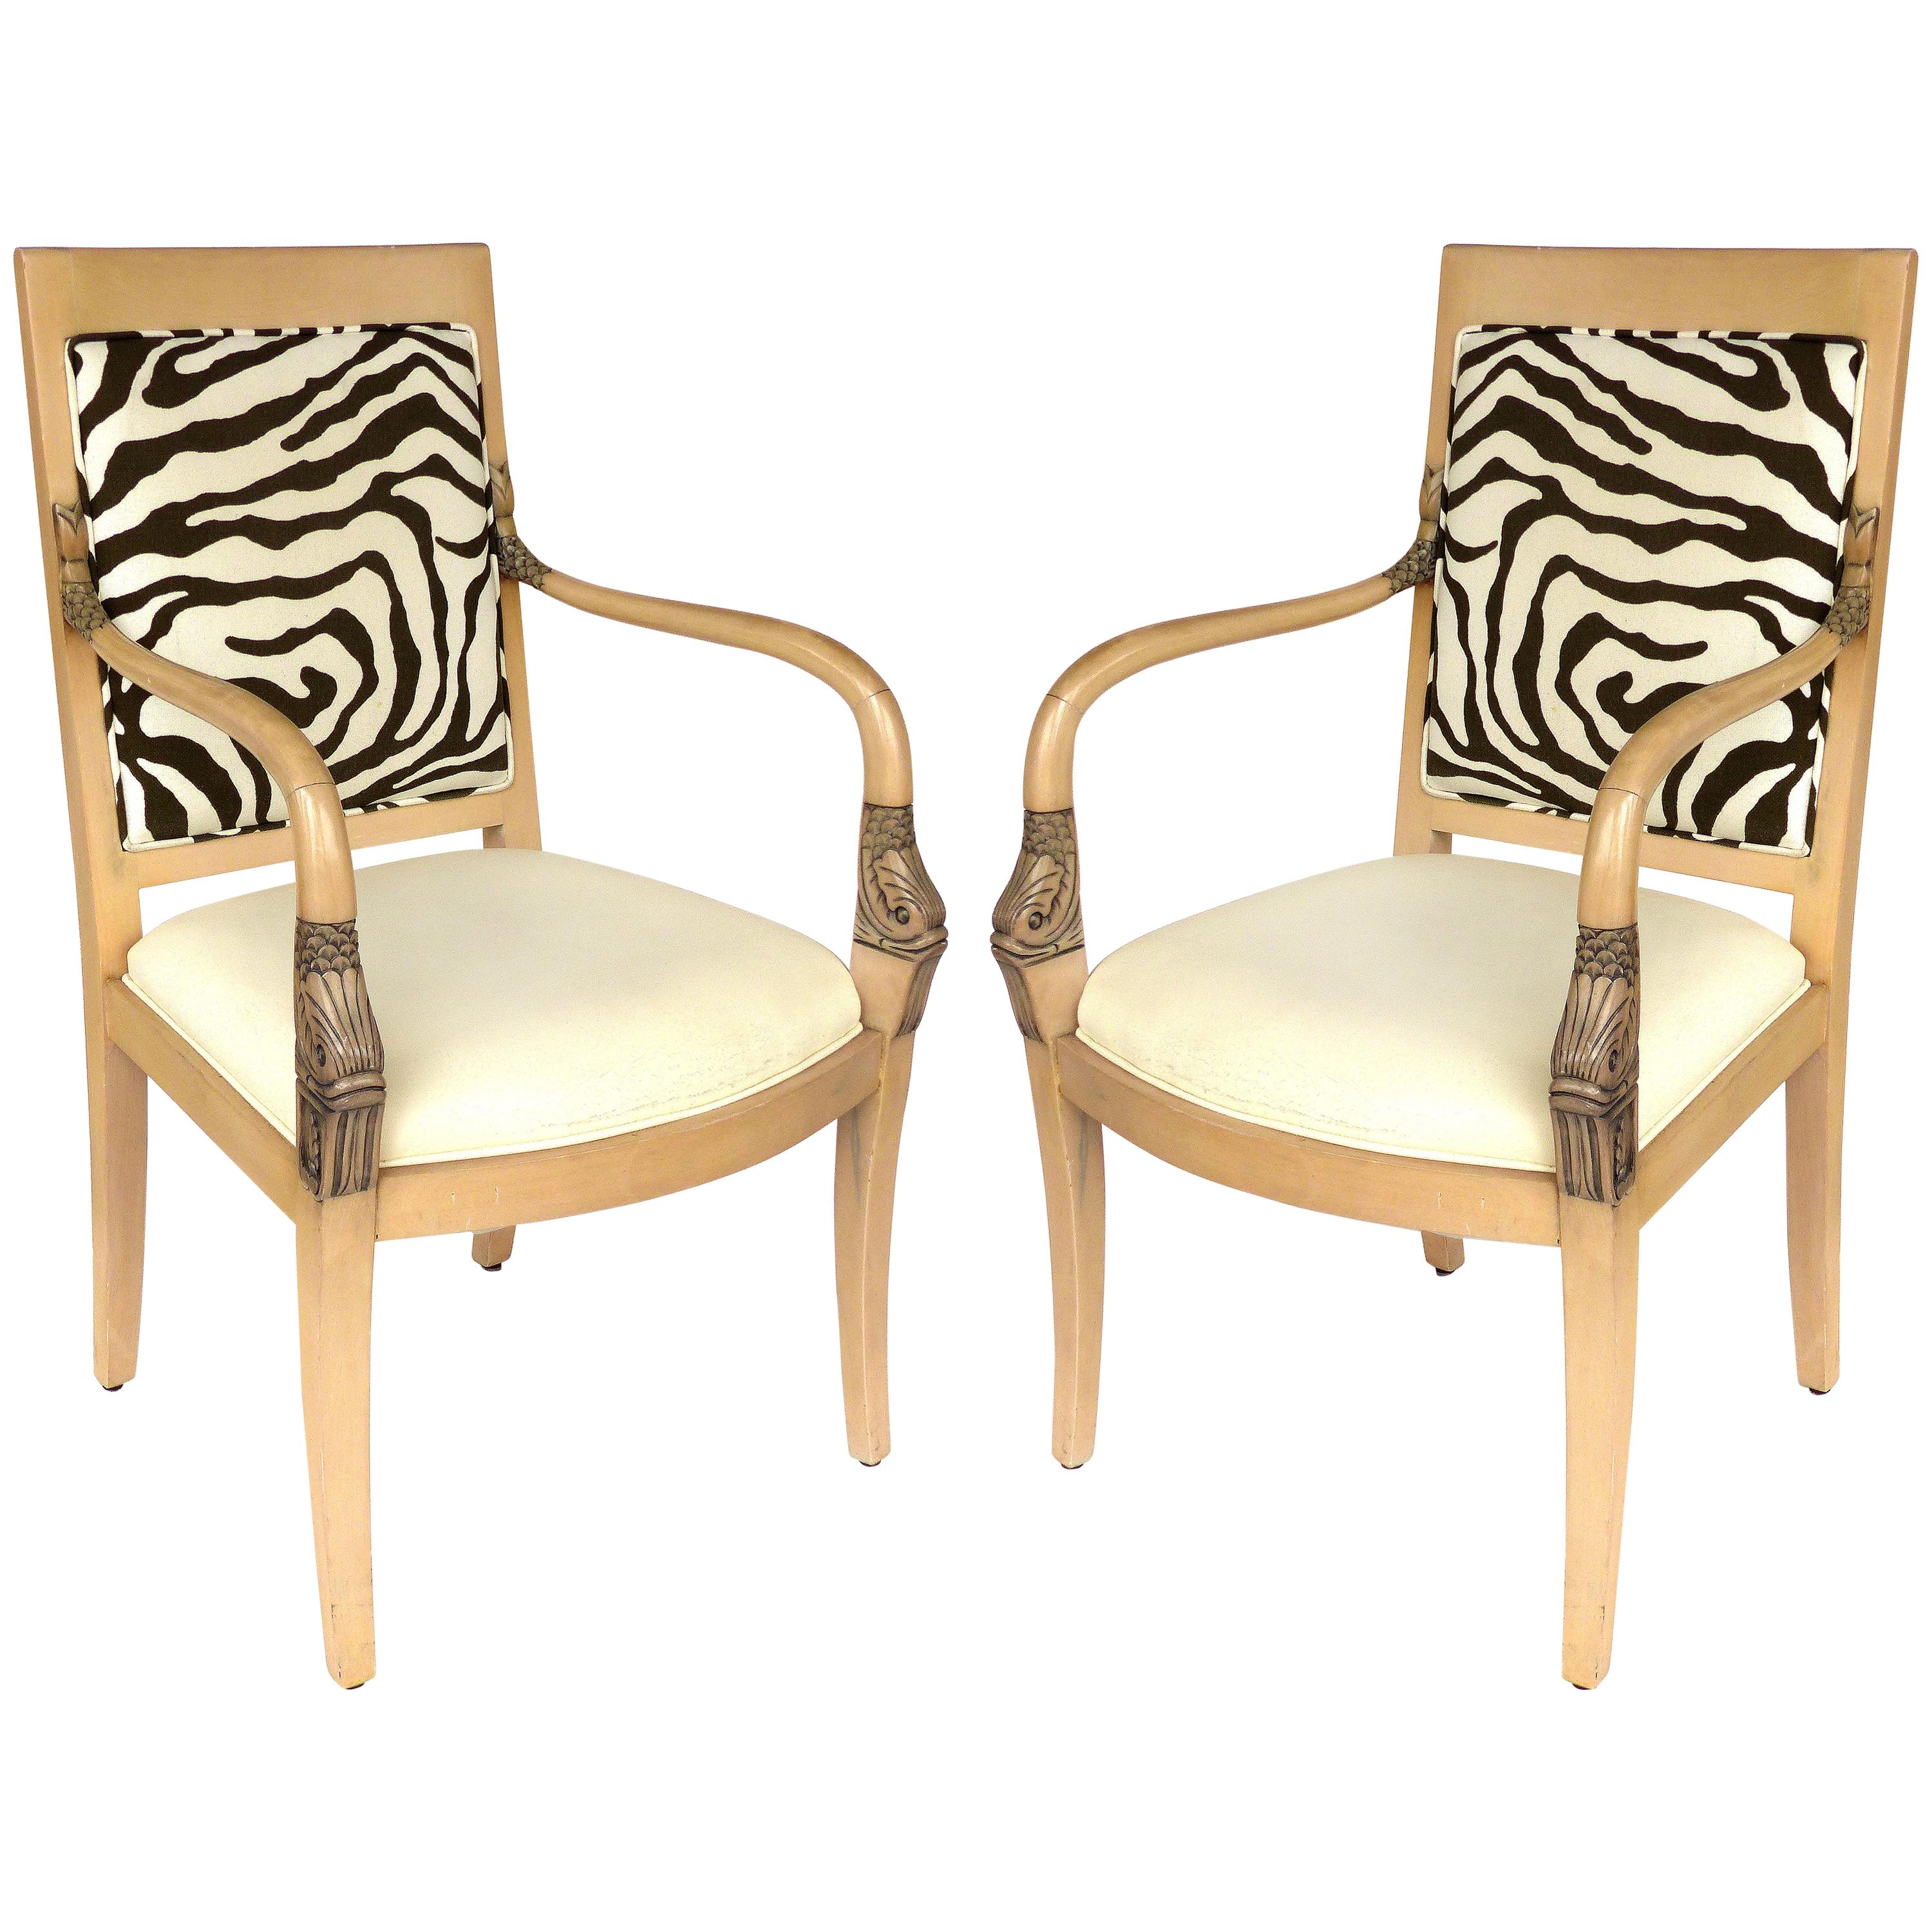 Armchairs of Blond Wood with Zebra Print Upholstery and Dolphin Carved Arms